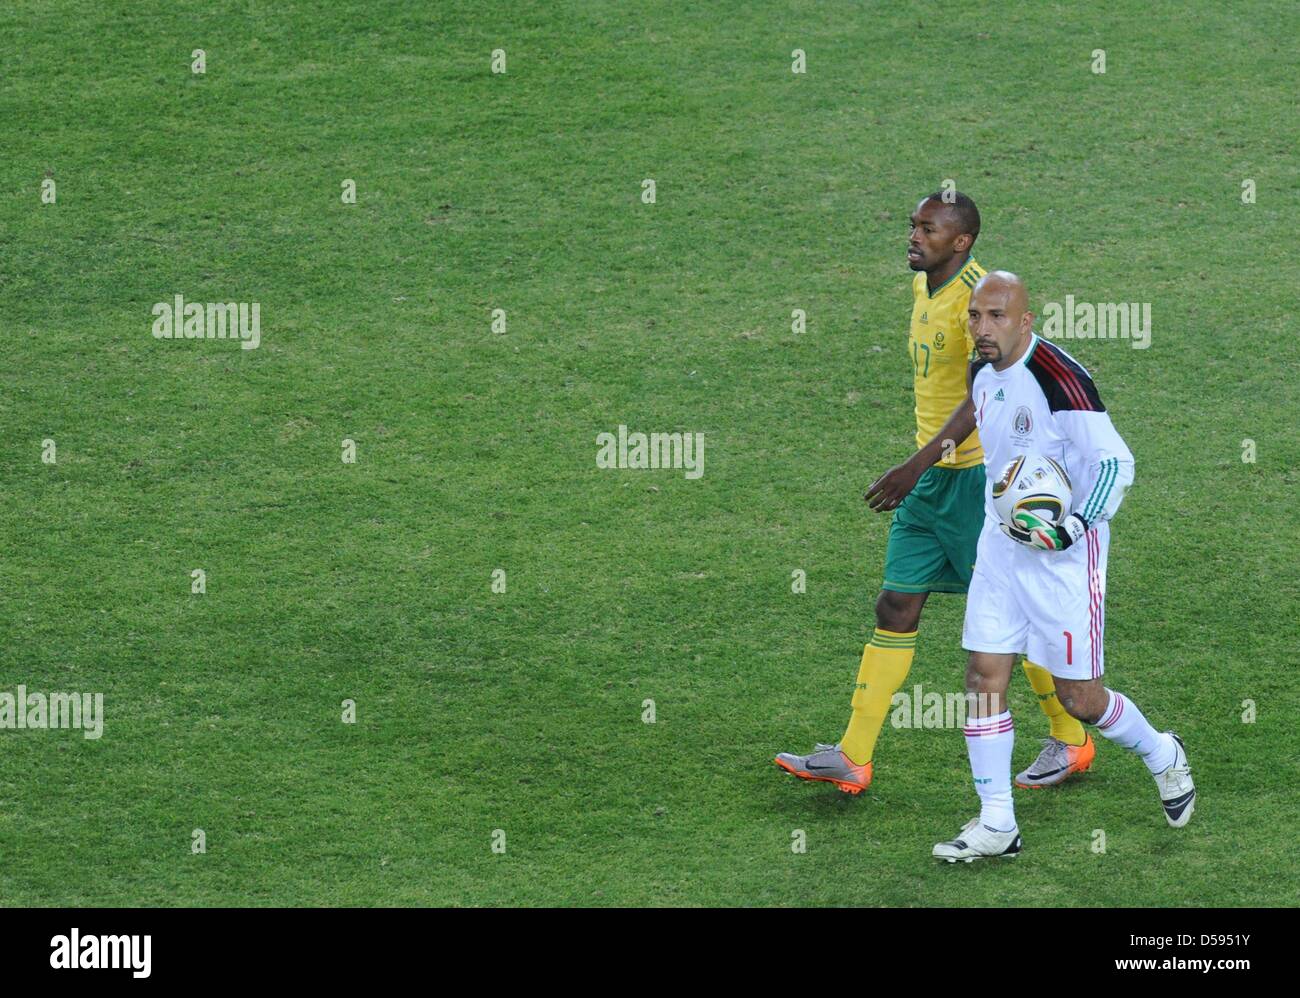 Goalkeeper Oscar Perez (R) of Mexico and South Africa's Bernard Parker during the 2010 FIFA World Cup opening match at Soccer City stadium in Johannesburg, South Africa 11 June 2010. Photo: Marcus Brandt dpa Please refer to http://dpaq.de/FIFA-WM2010-TC Stock Photo